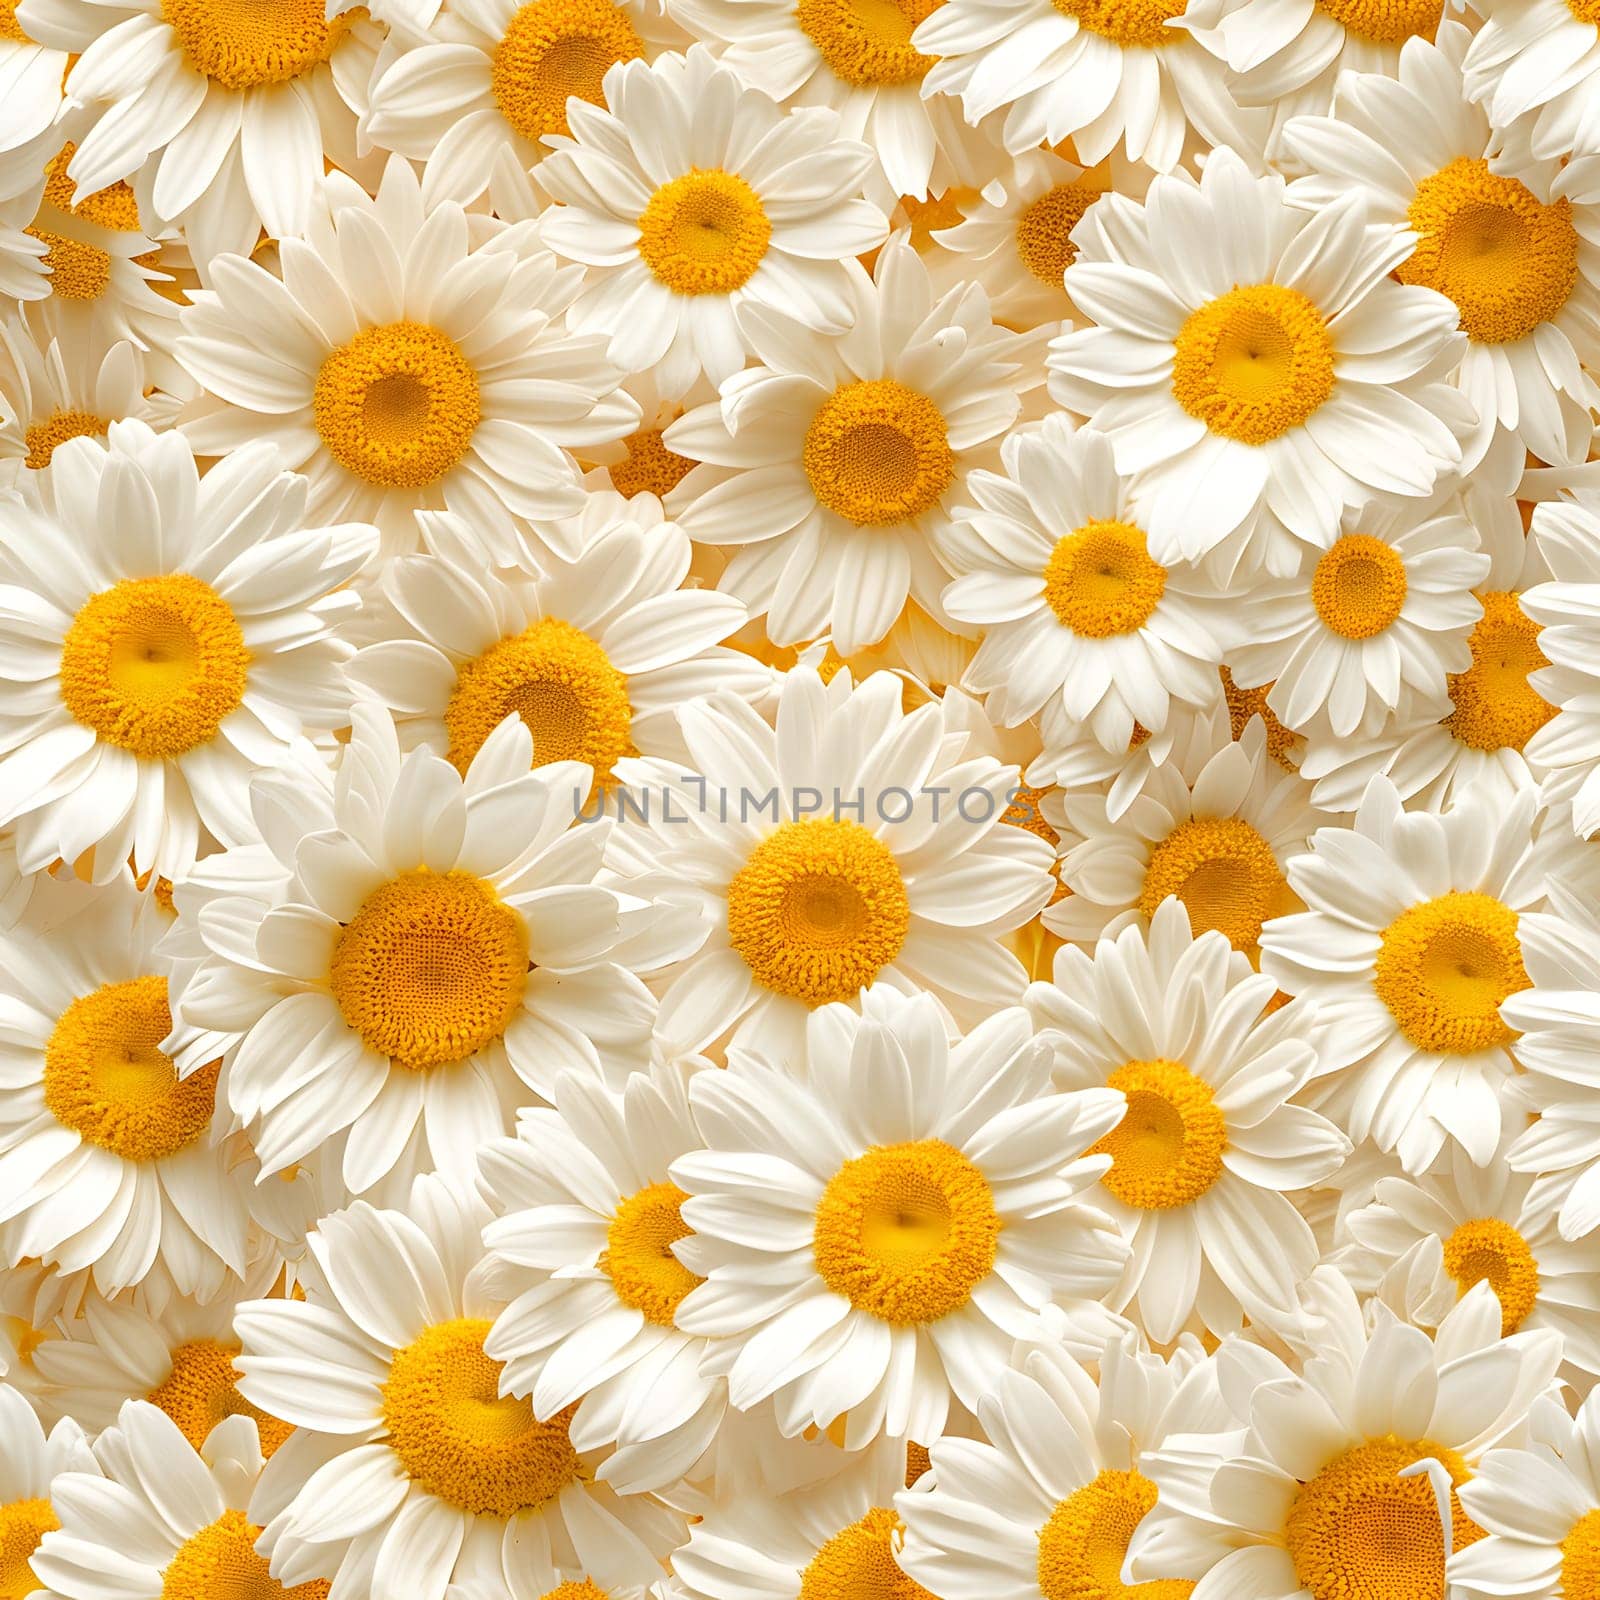 A Lot Of White Yellow Daisies or chamomile flowers - for full-frame background and seamless texture by z1b